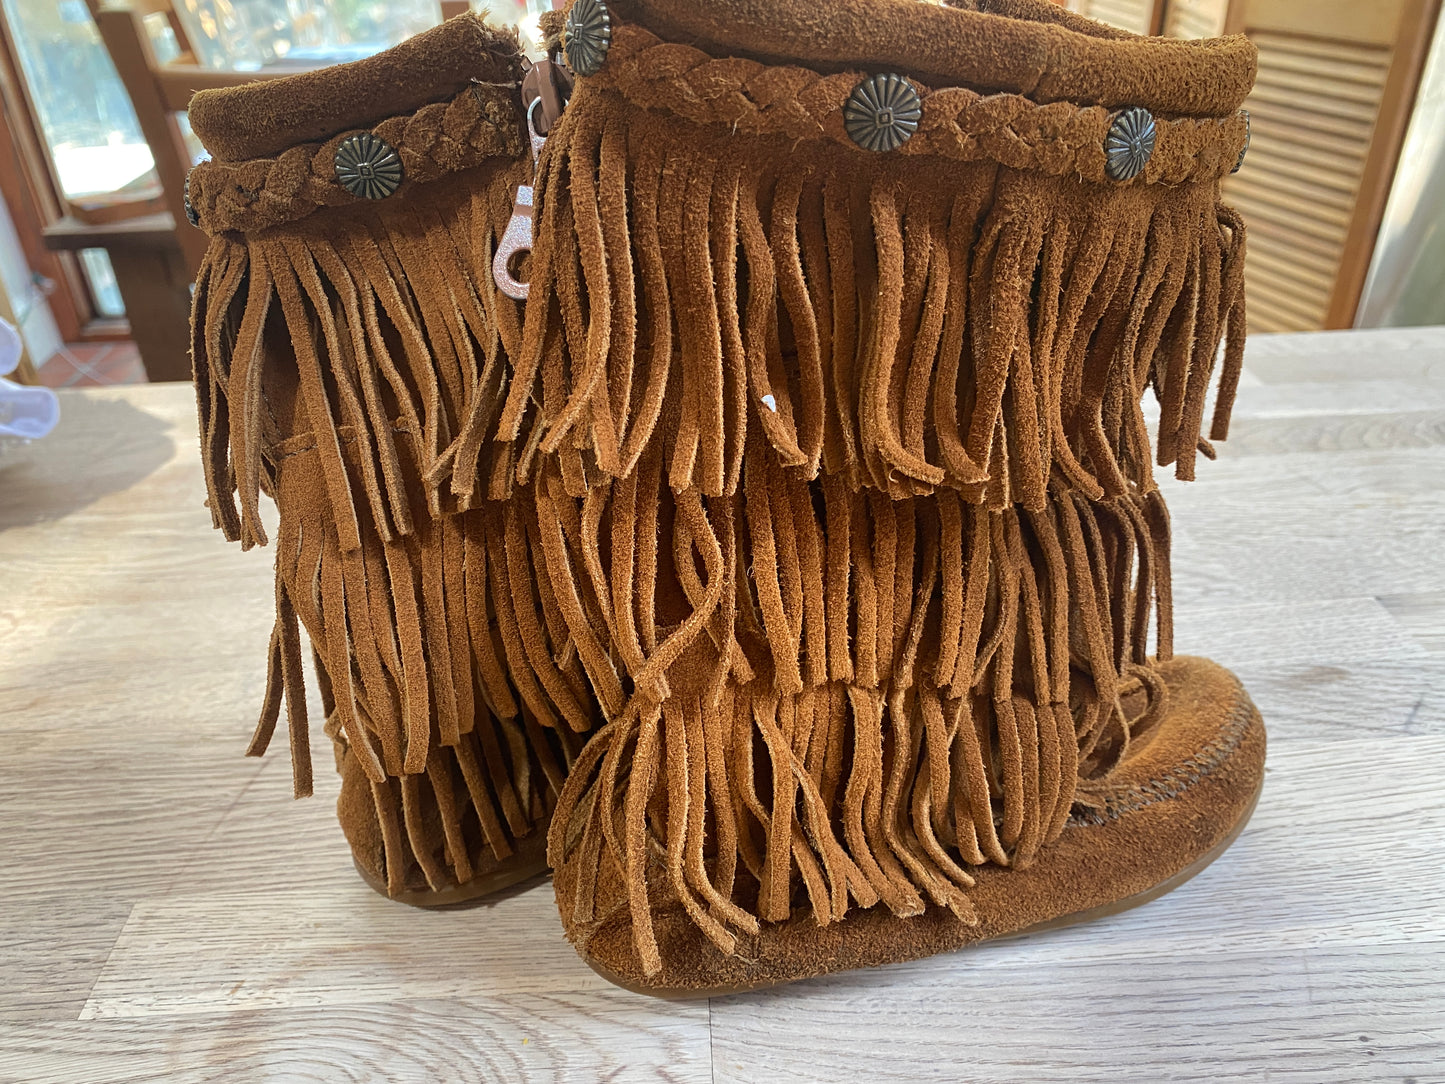 Minnetonka Tall Zip Boot with Fringe (Pre-Loved) Size 13